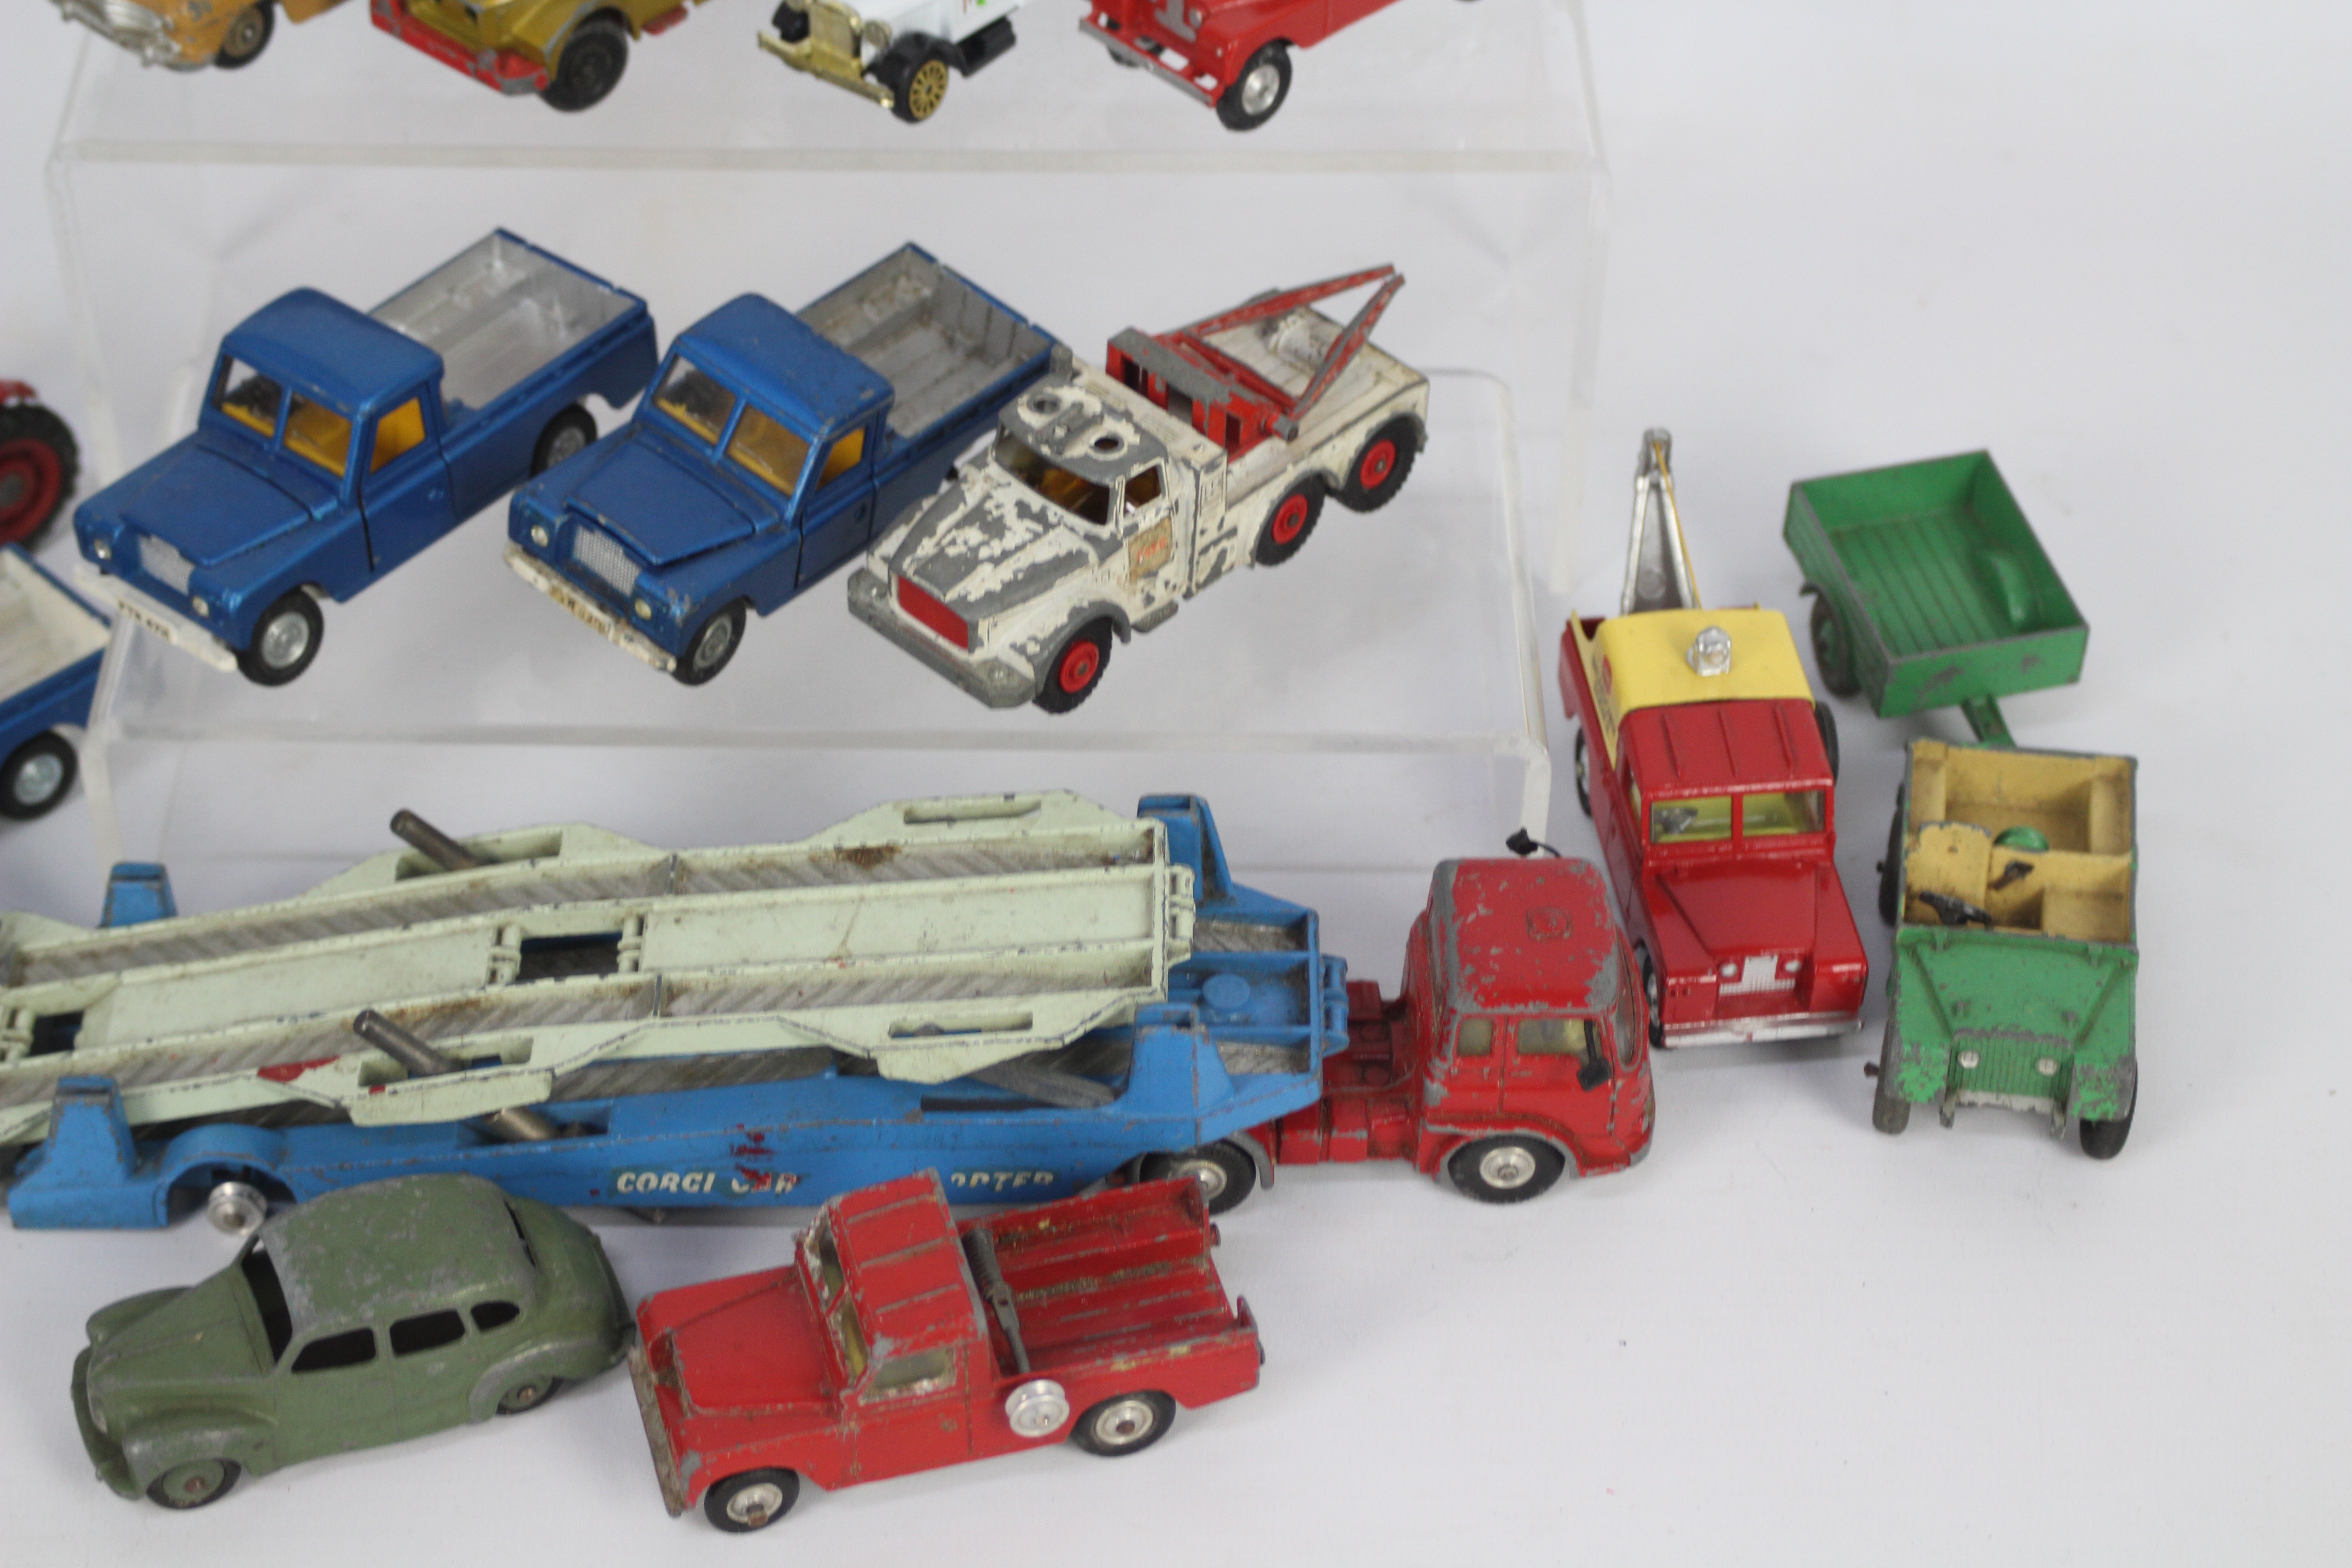 Corgi - Spot-On - Dinky - 15 x unboxed vehicles including # 258 Spot-On RAC Land Rover, - Image 4 of 4